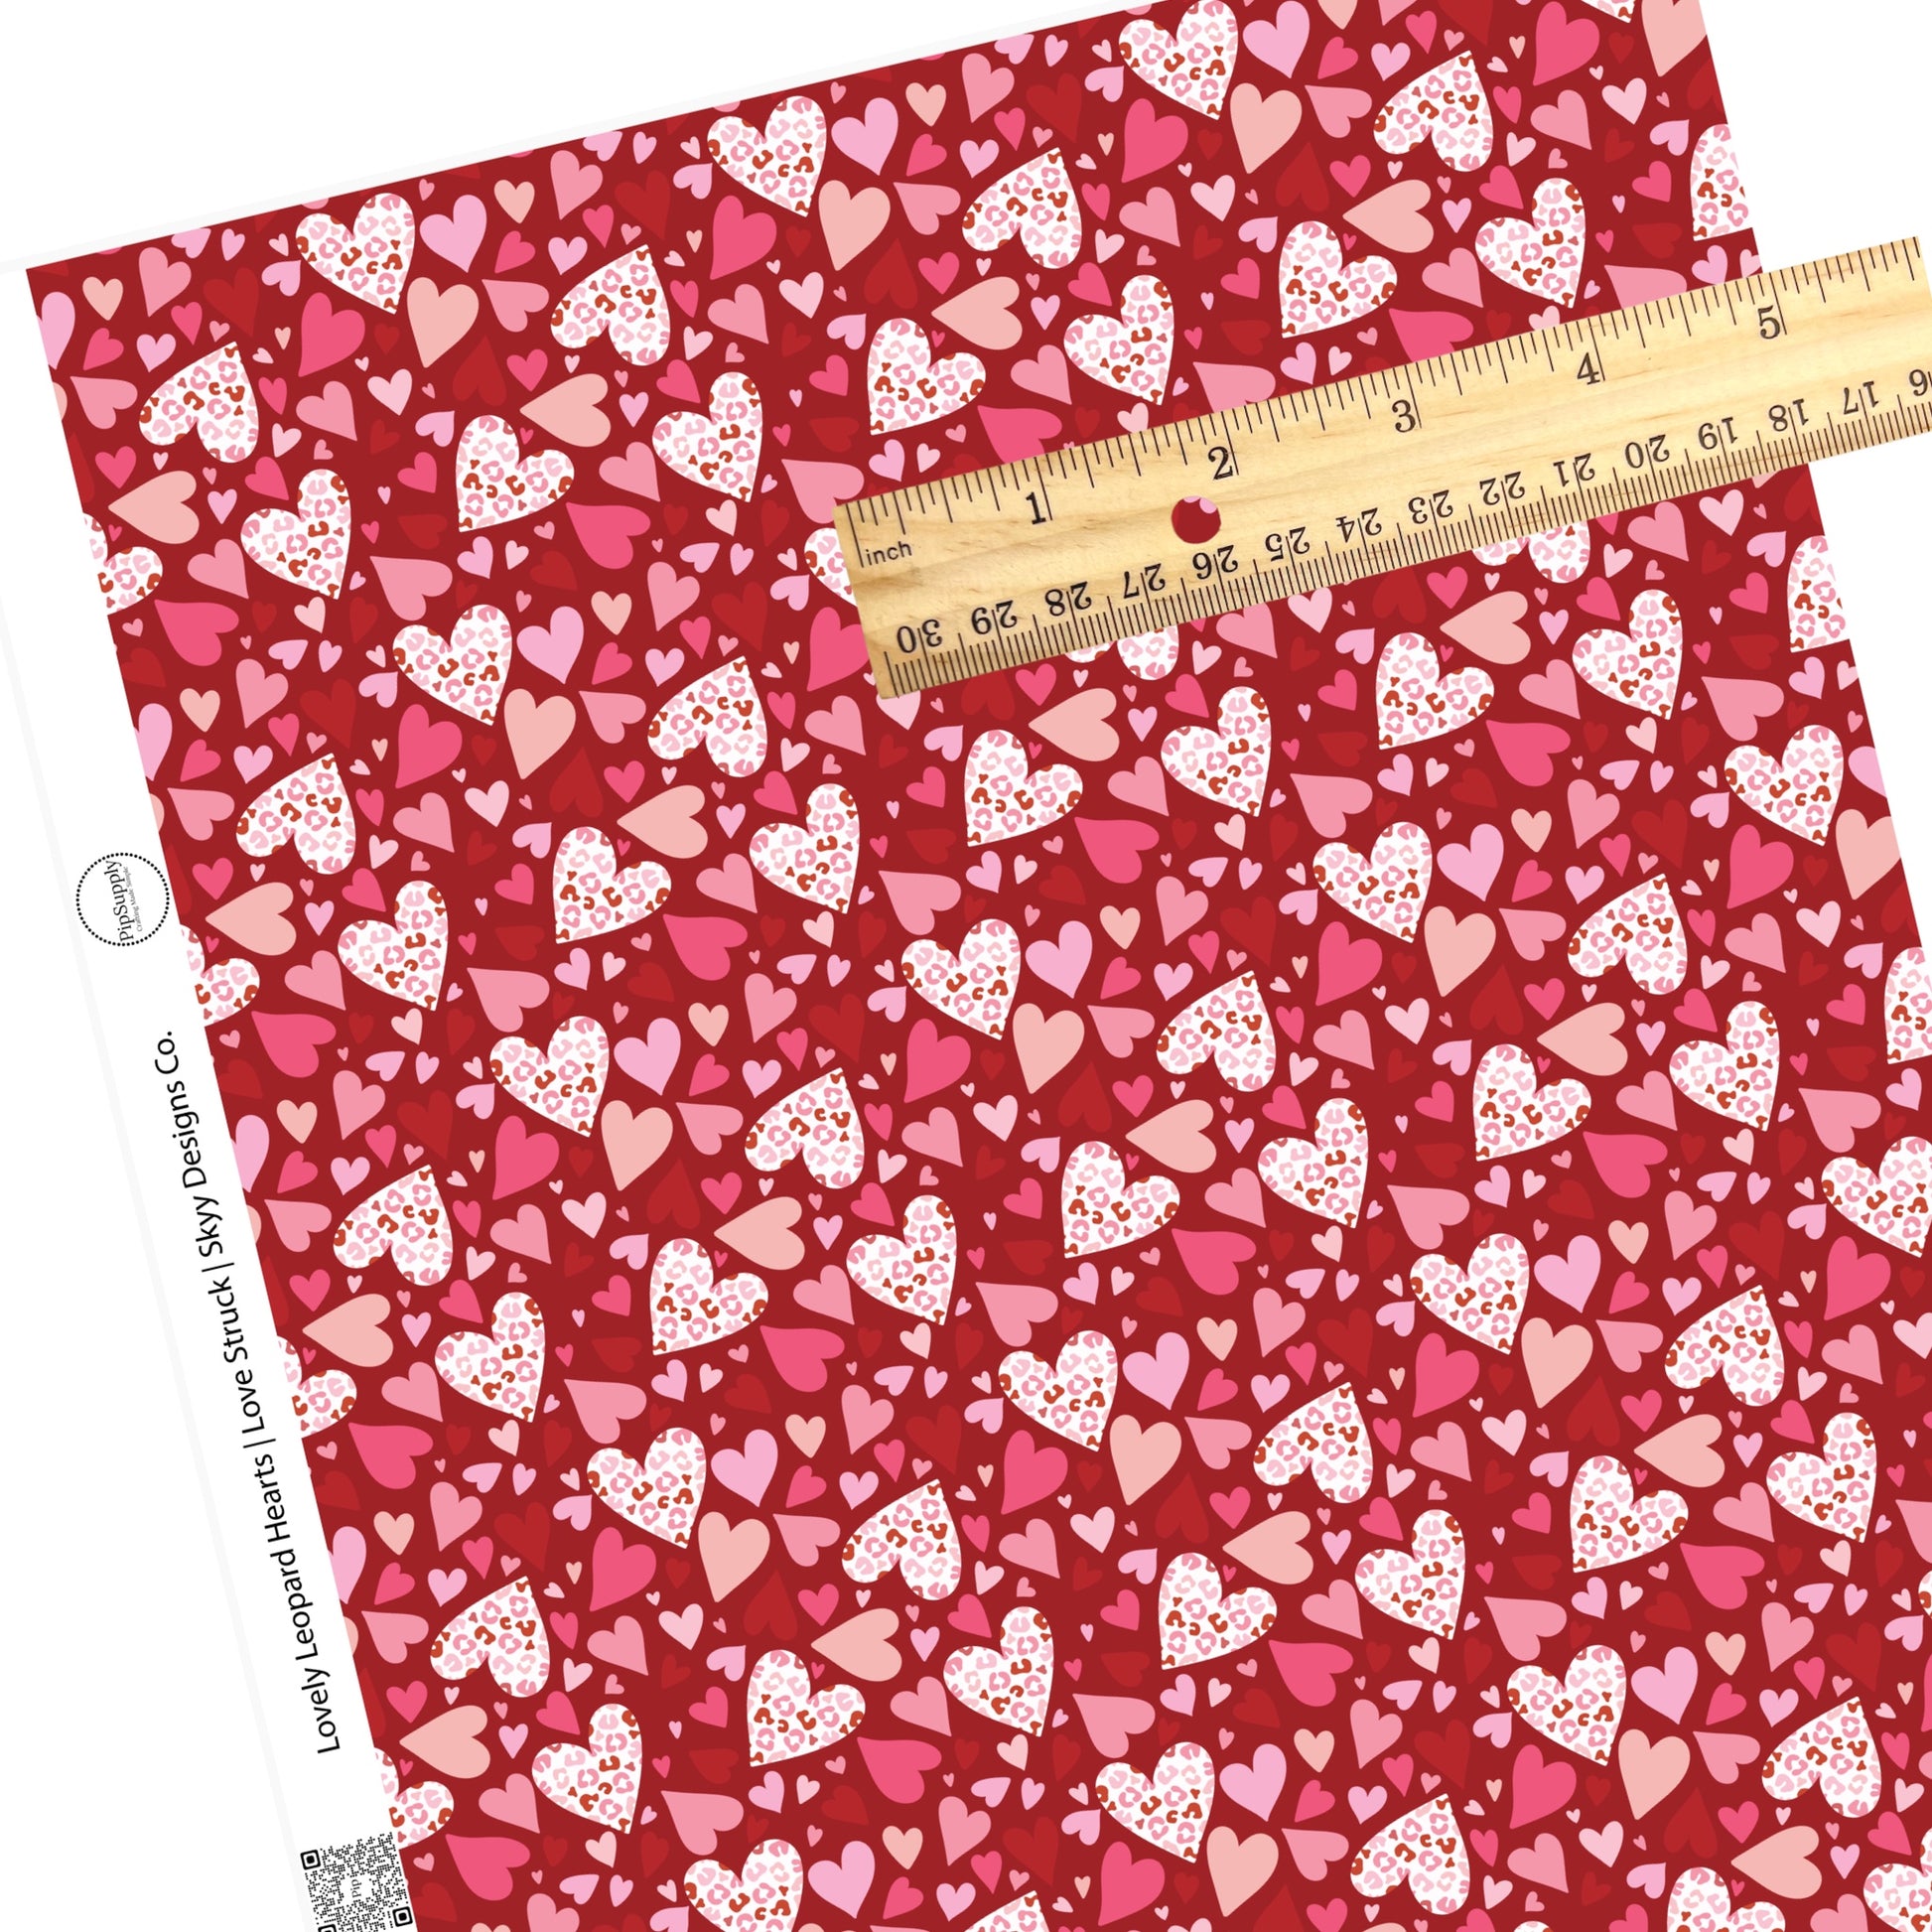 White leopard hearts and tiny multicolored hearts on red faux leather sheets